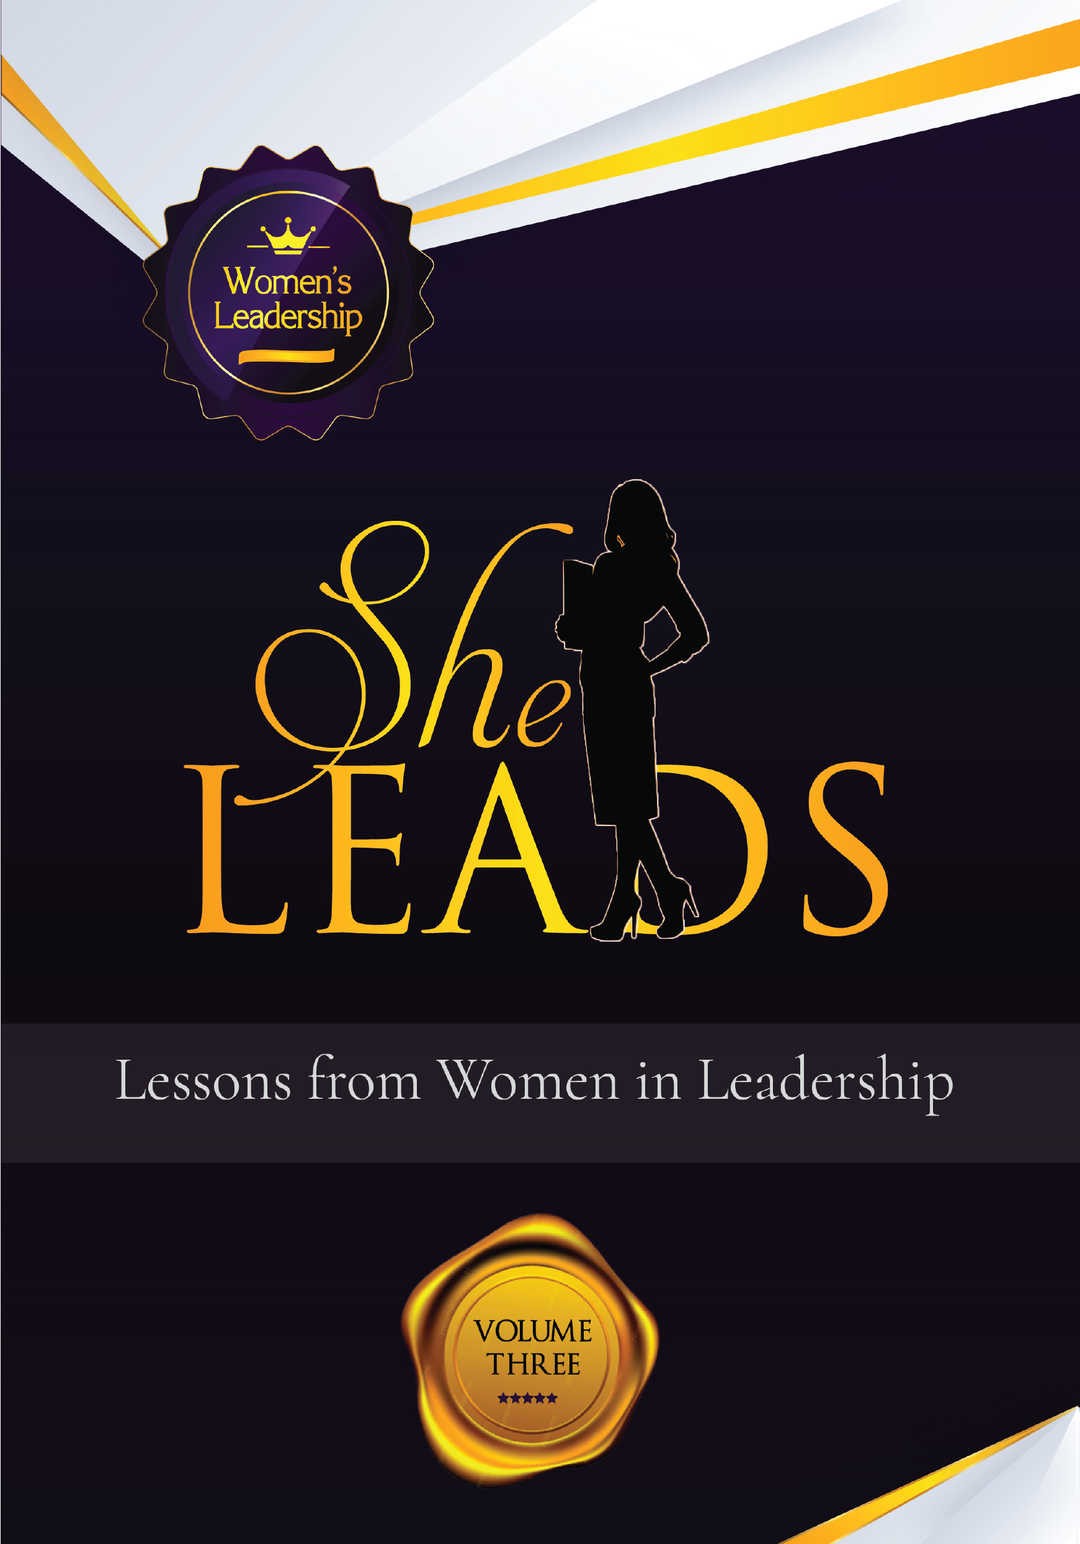 SheLeads (Volume 3): Lessons from Women Leaders